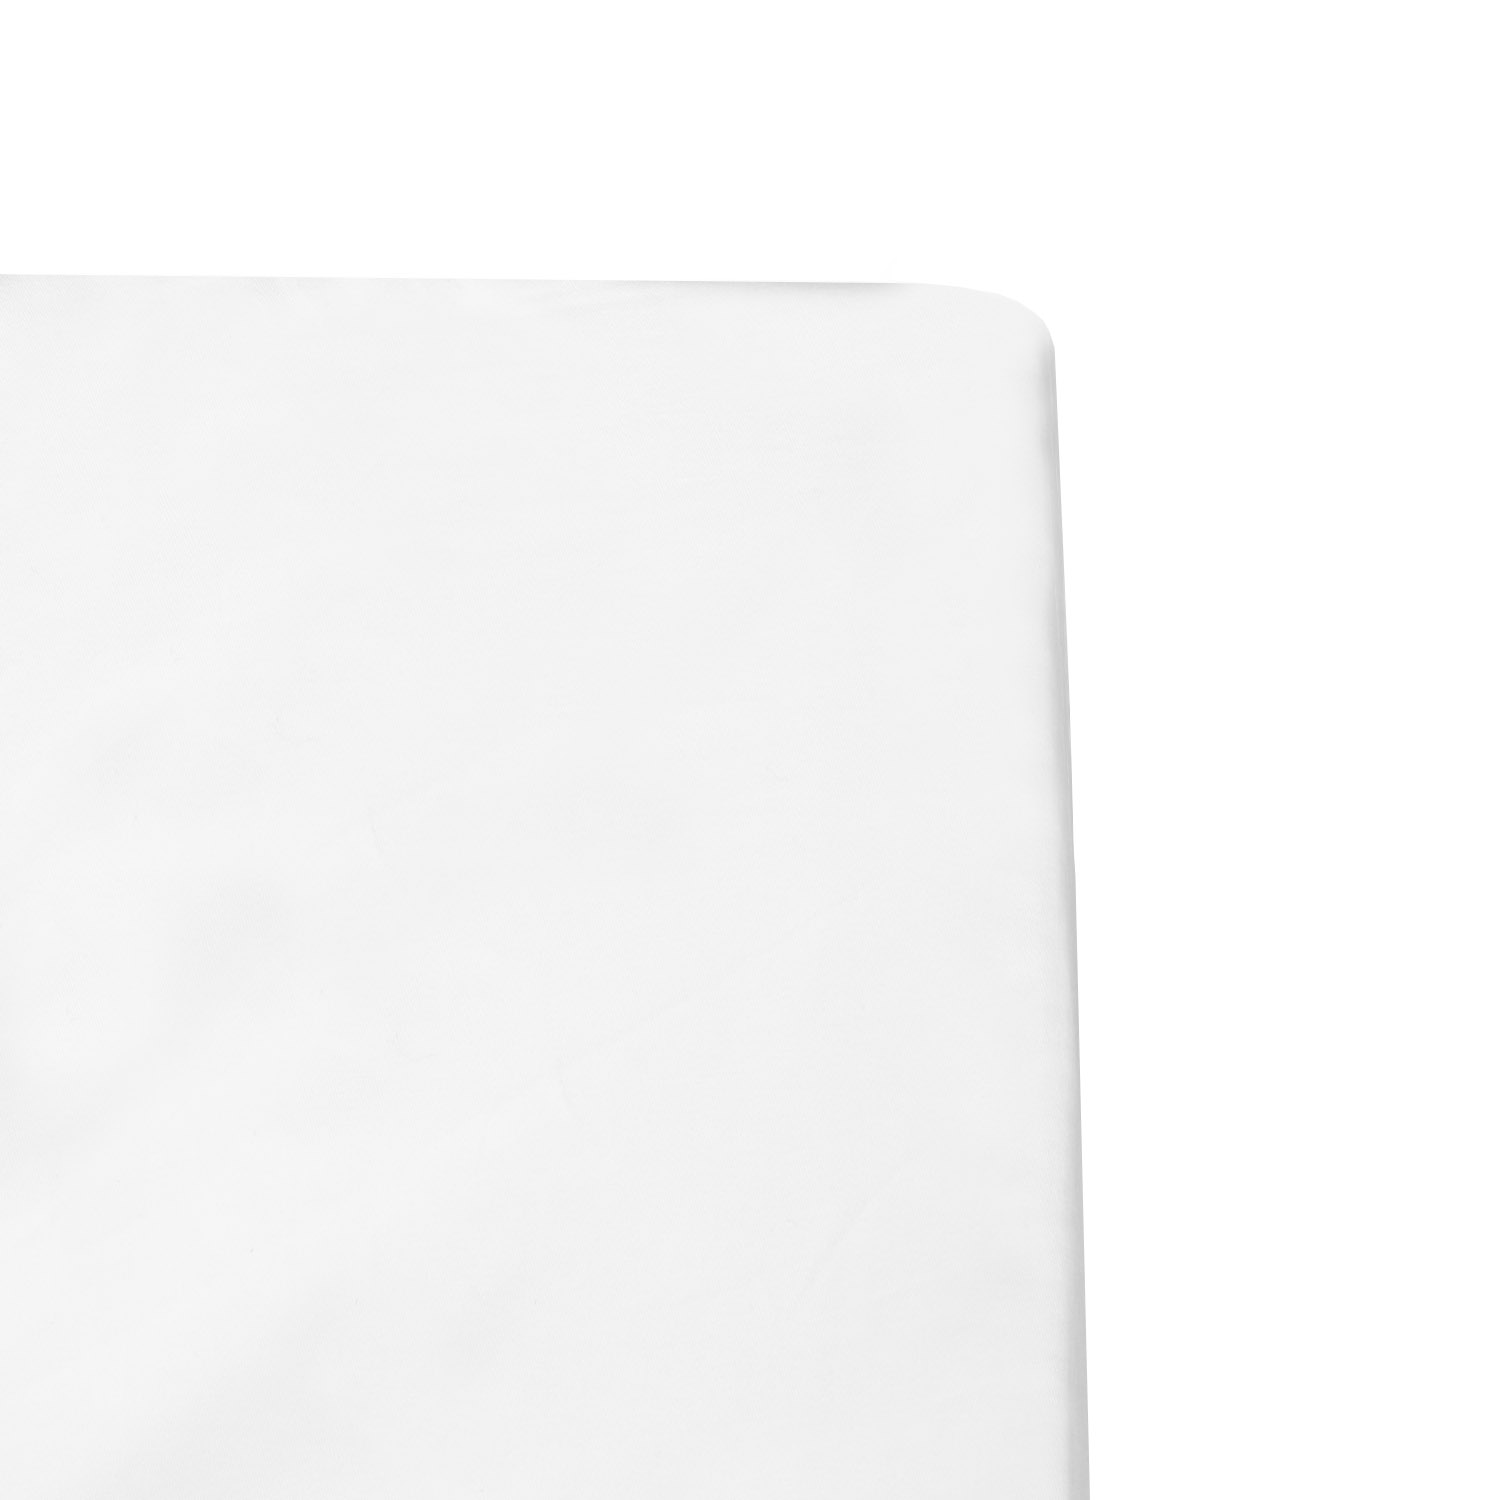 Bed Sheet Bed Sheet 140 160 180 cm Fitted Sheet 100% Cotton White